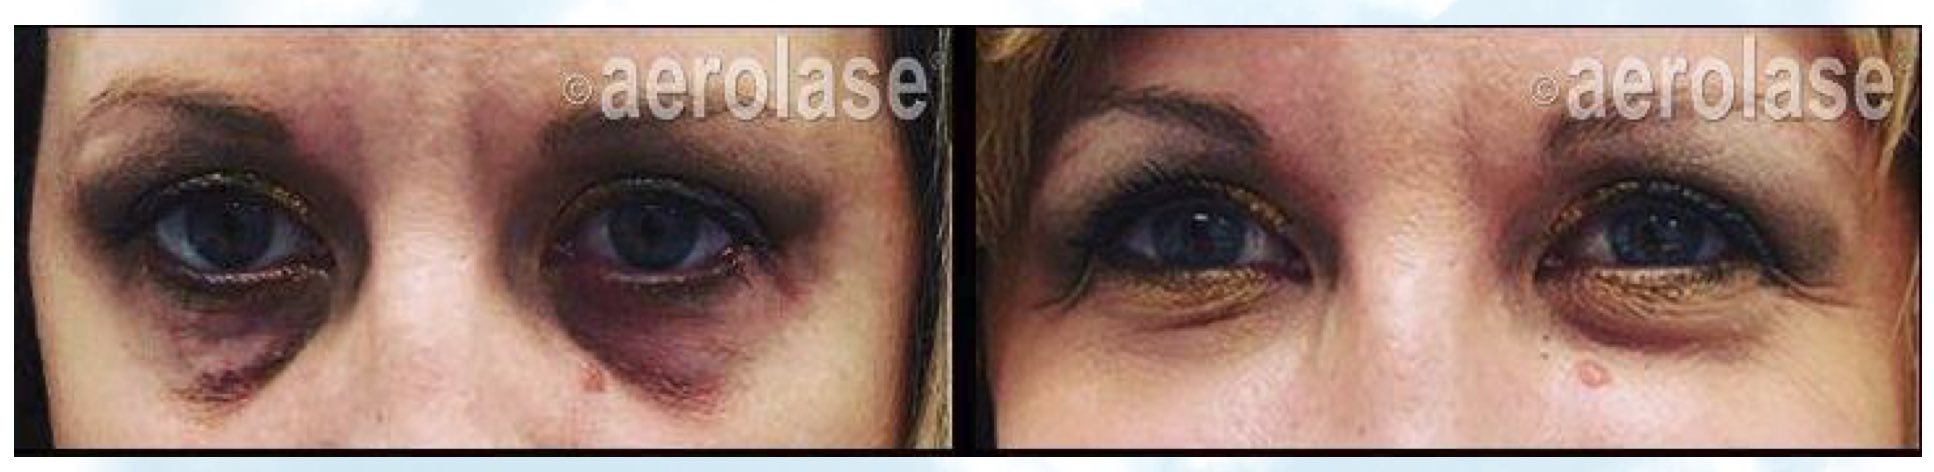 Treatment of dark circles under the eyes with filler and Aerolase Neo Laser  Dr BCK Patel MD, FRCS Plastic Surgeon, Salt Lake City and St. George UtahPicturePicture